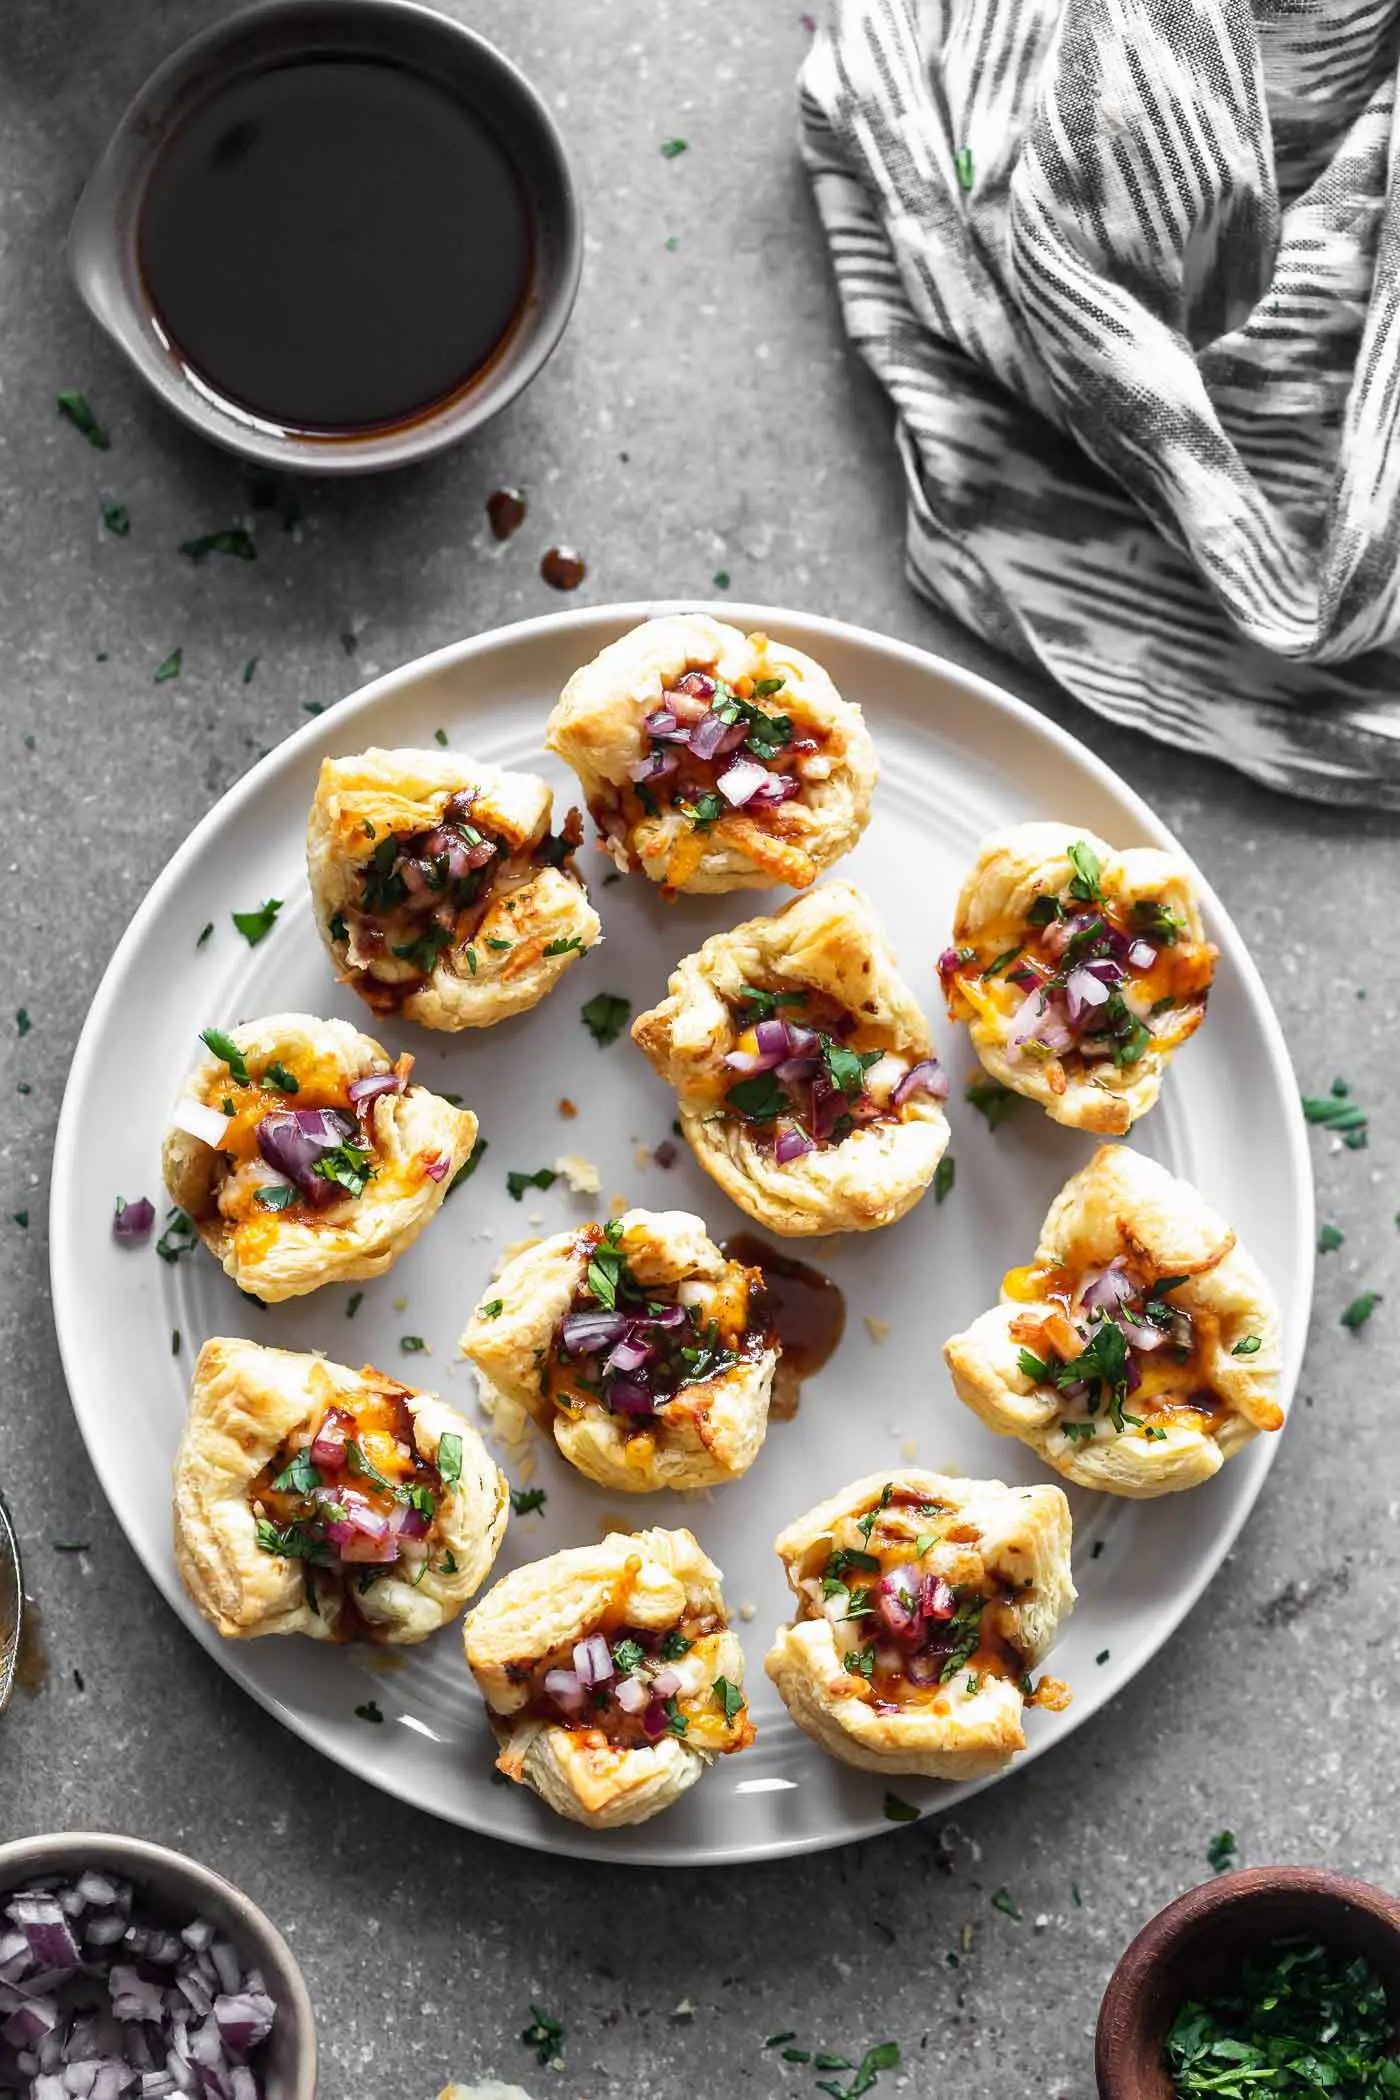 Cheesy Barbecue Chicken Bites: Chopped chicken tossed in your favorite barbecue sauce, covered in cheese and served with chopped red onion and cilantro. The perfect bite-sized appetizer for a crowd!